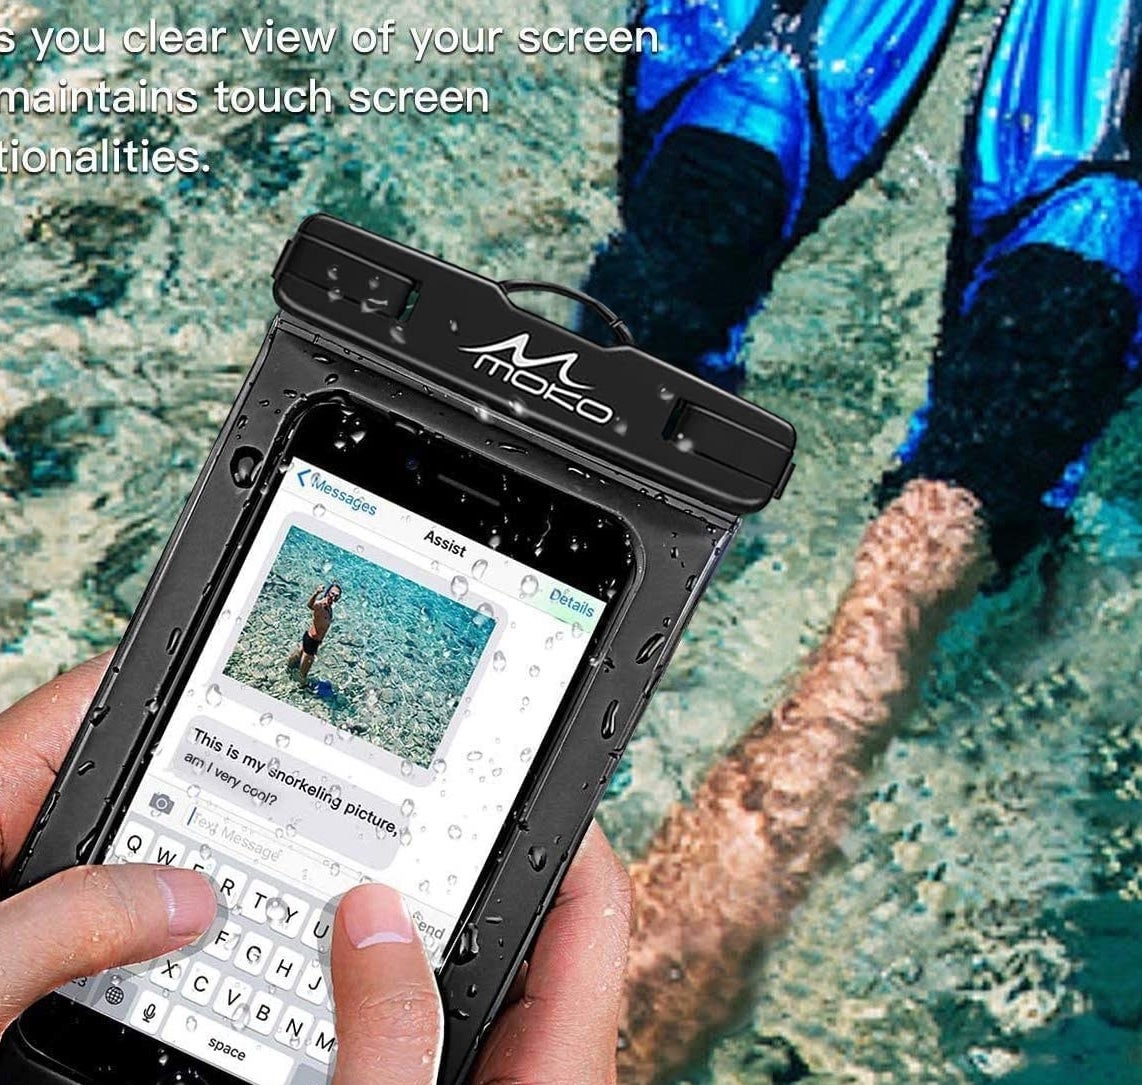 a person using their phone in the pouch while sitting in a body of water